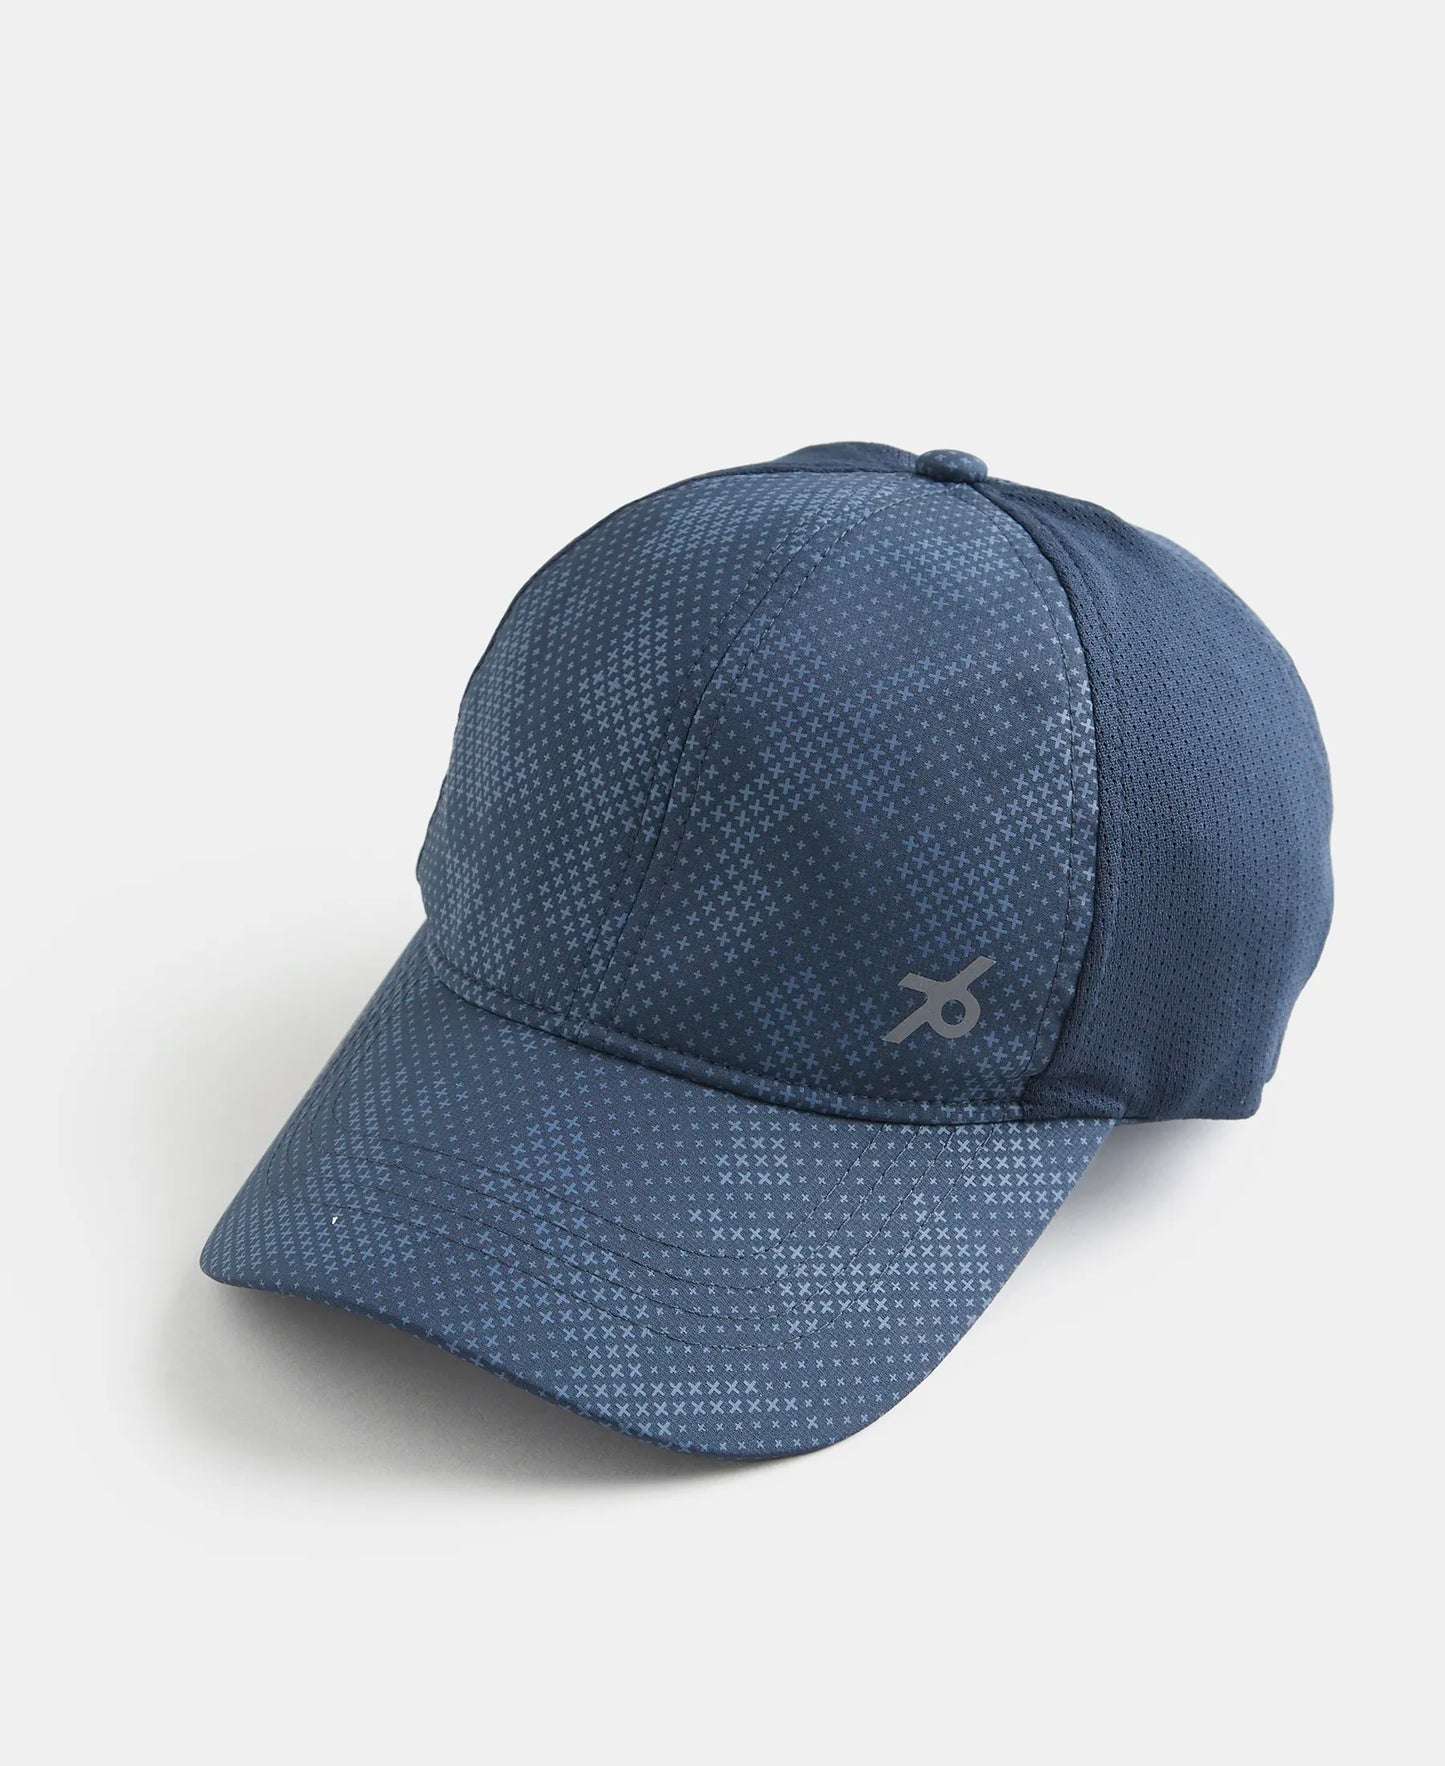 Polyester Printed Cap with Adjustable Back Closure and StayDry Technology - Navy-2